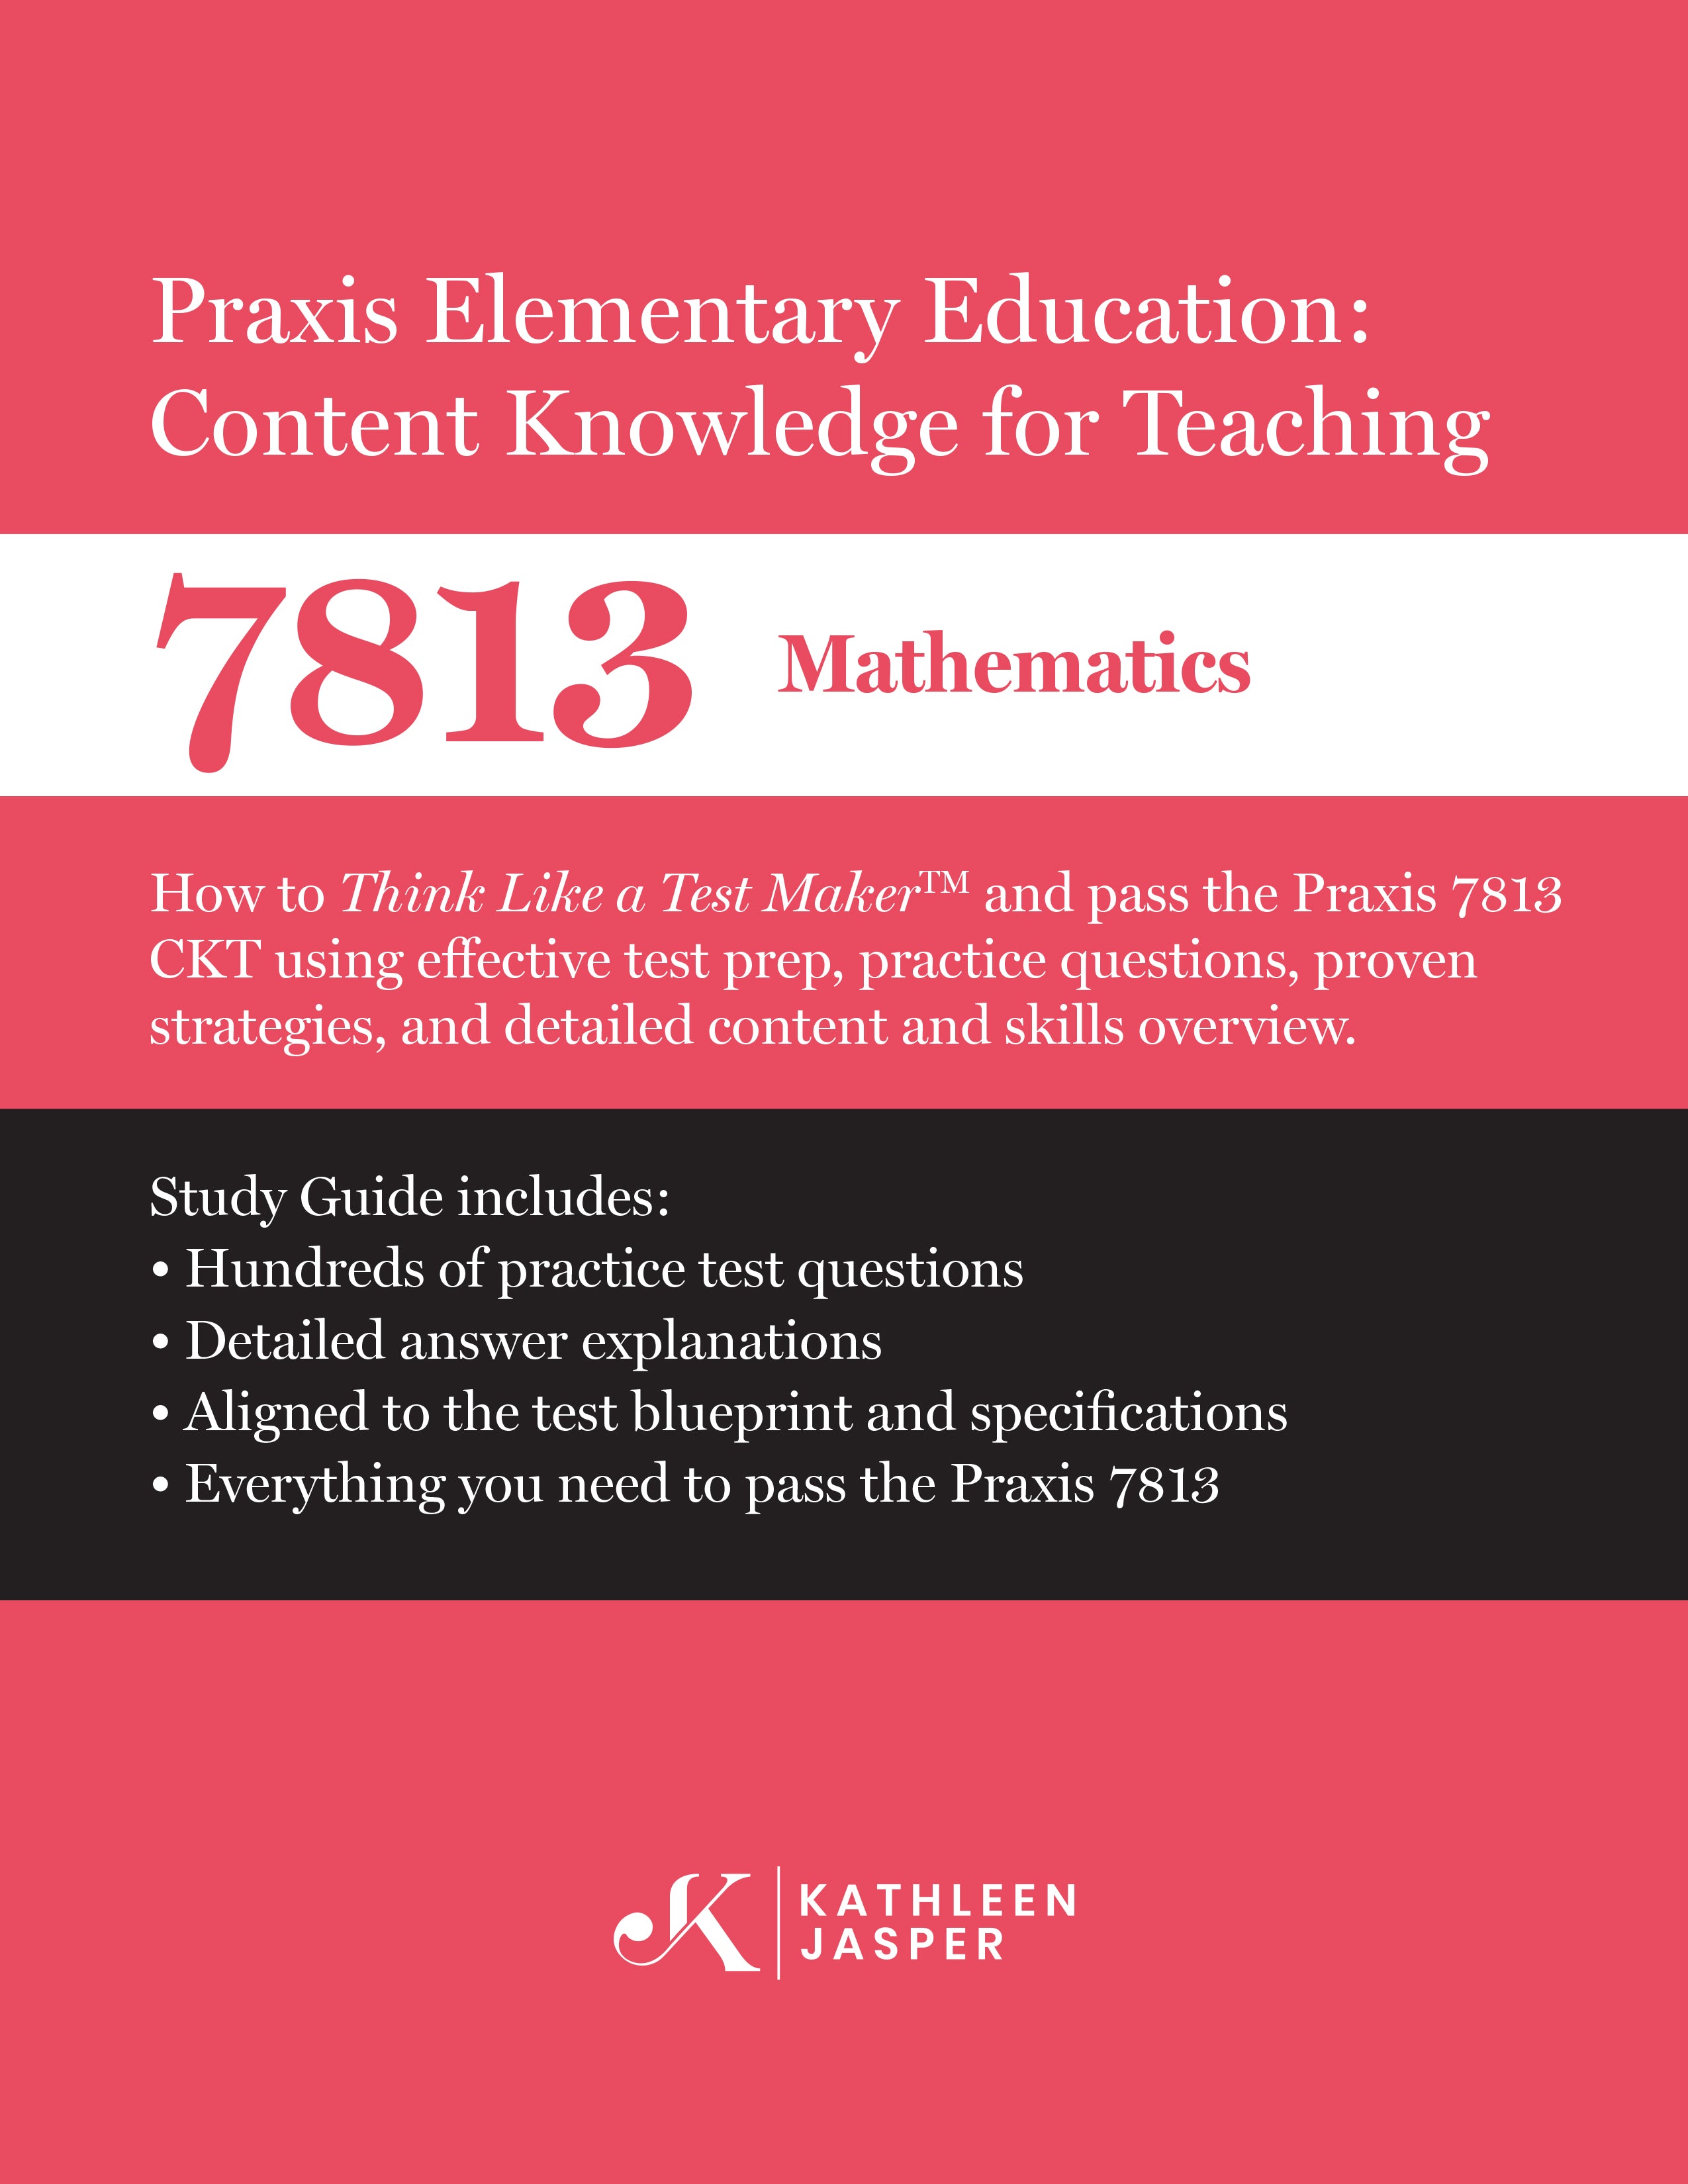 Praxis II Elementary Education Content Knowledge for Teaching (CKT) 7813 - Mathematics